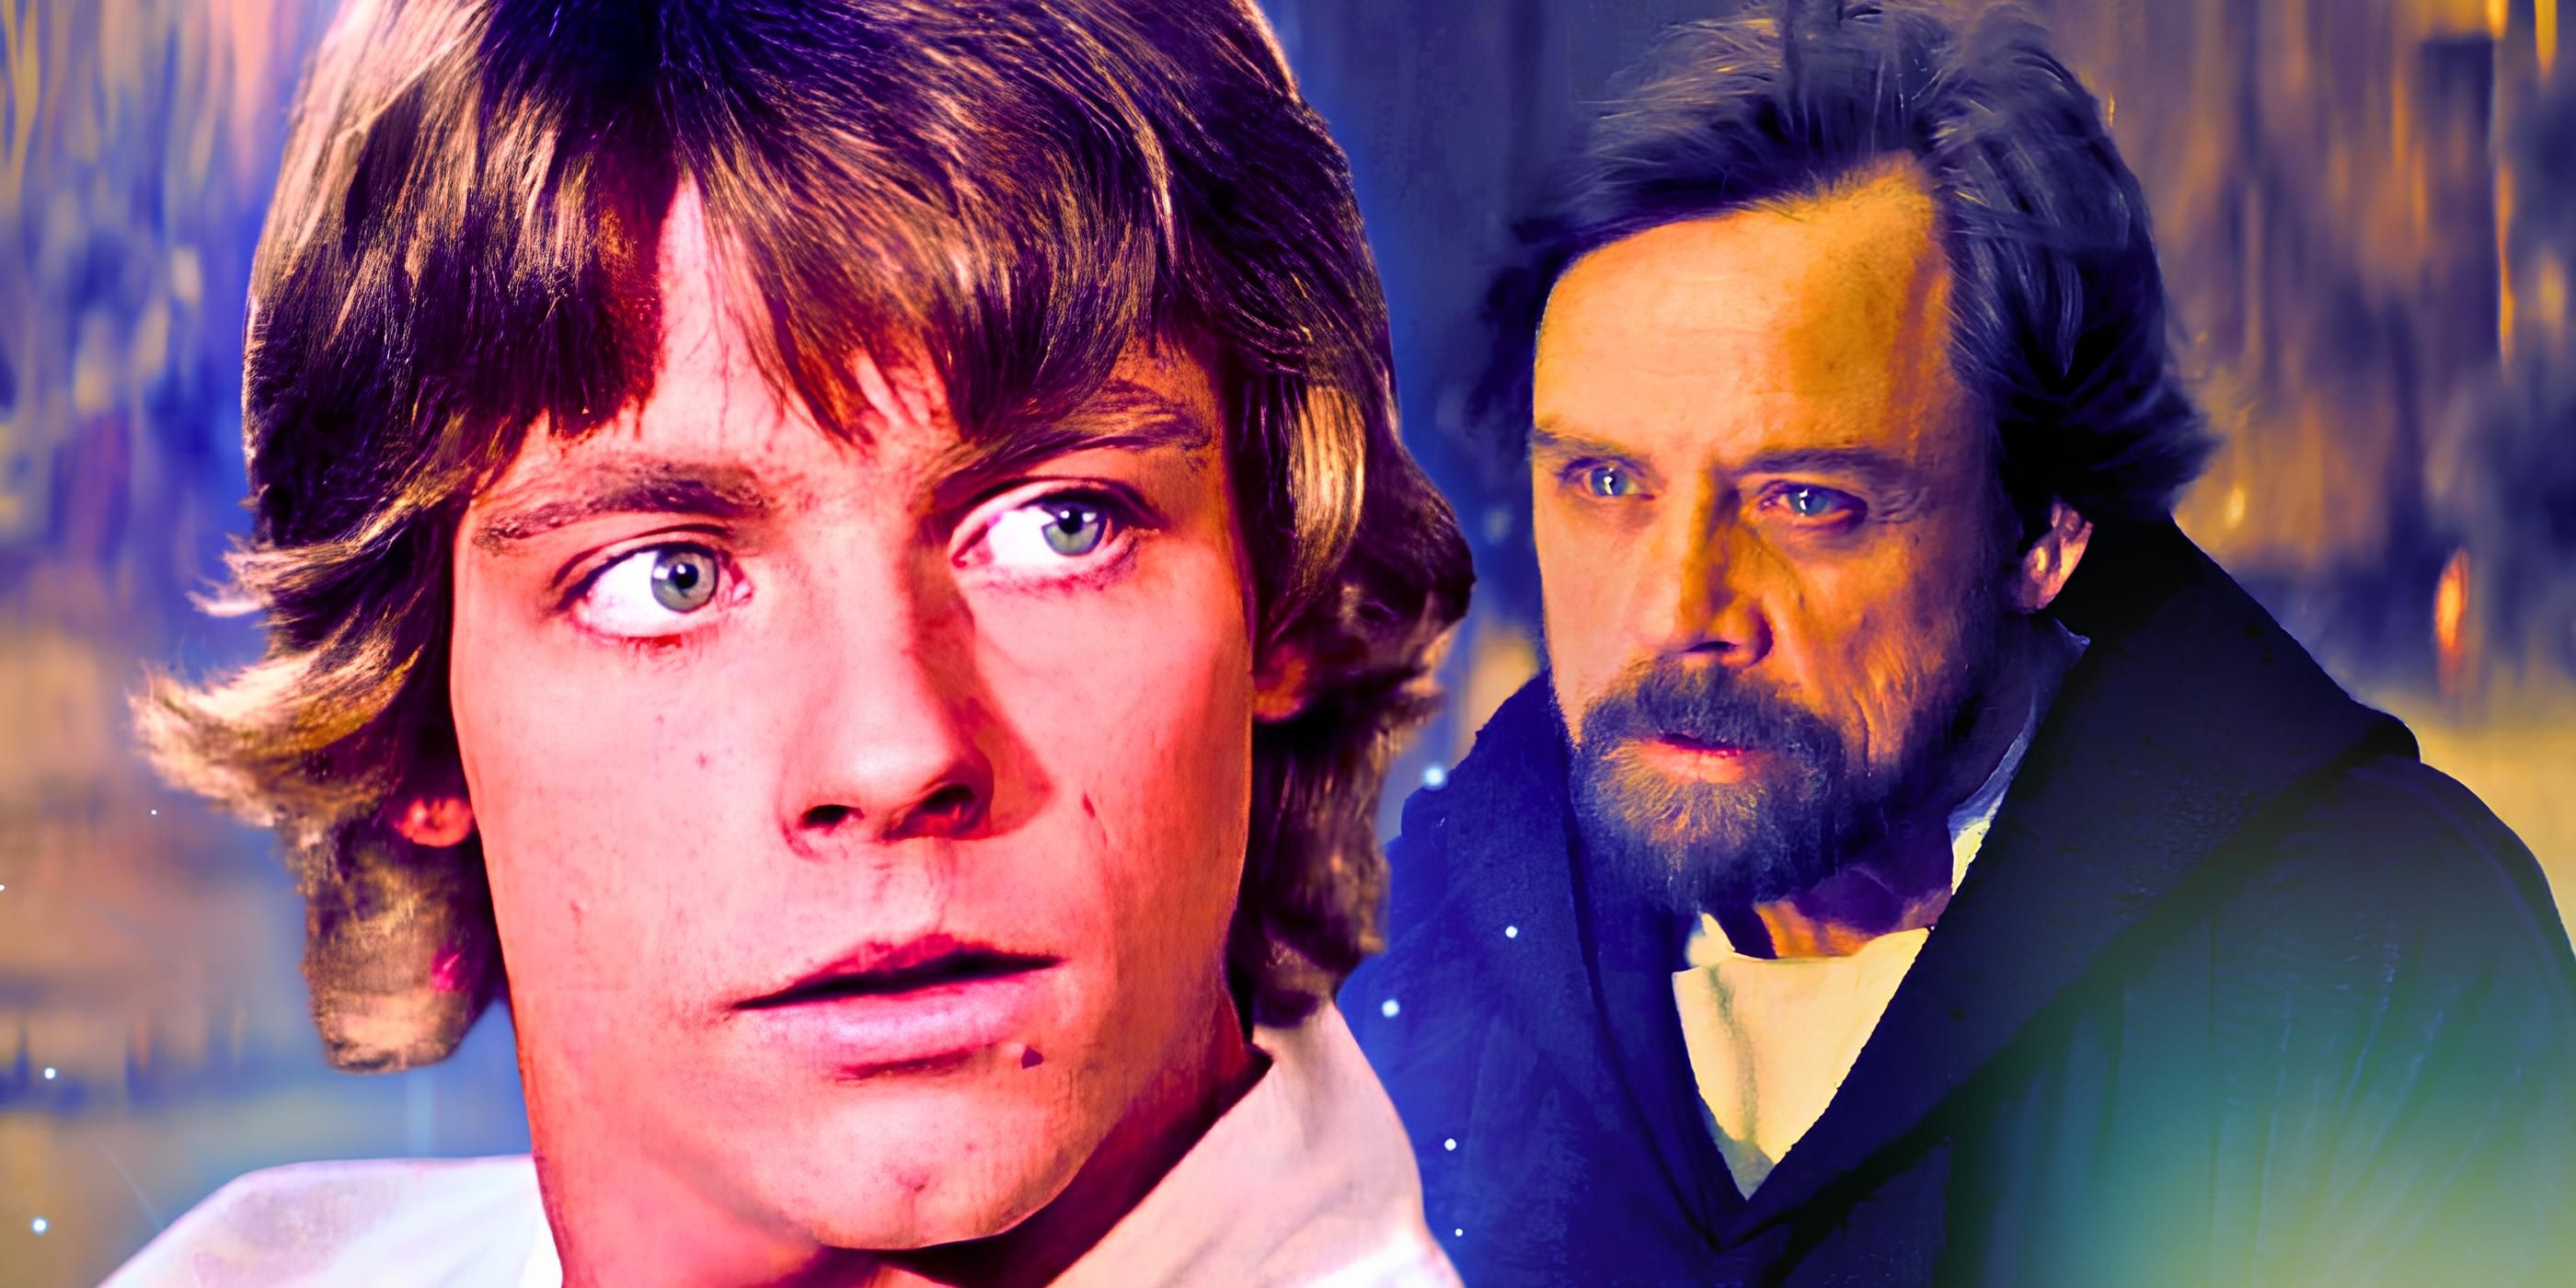 Mark Hamill as Luke Skywalker in A New Hope to the left and in The Last Jedi to the right in a combined image